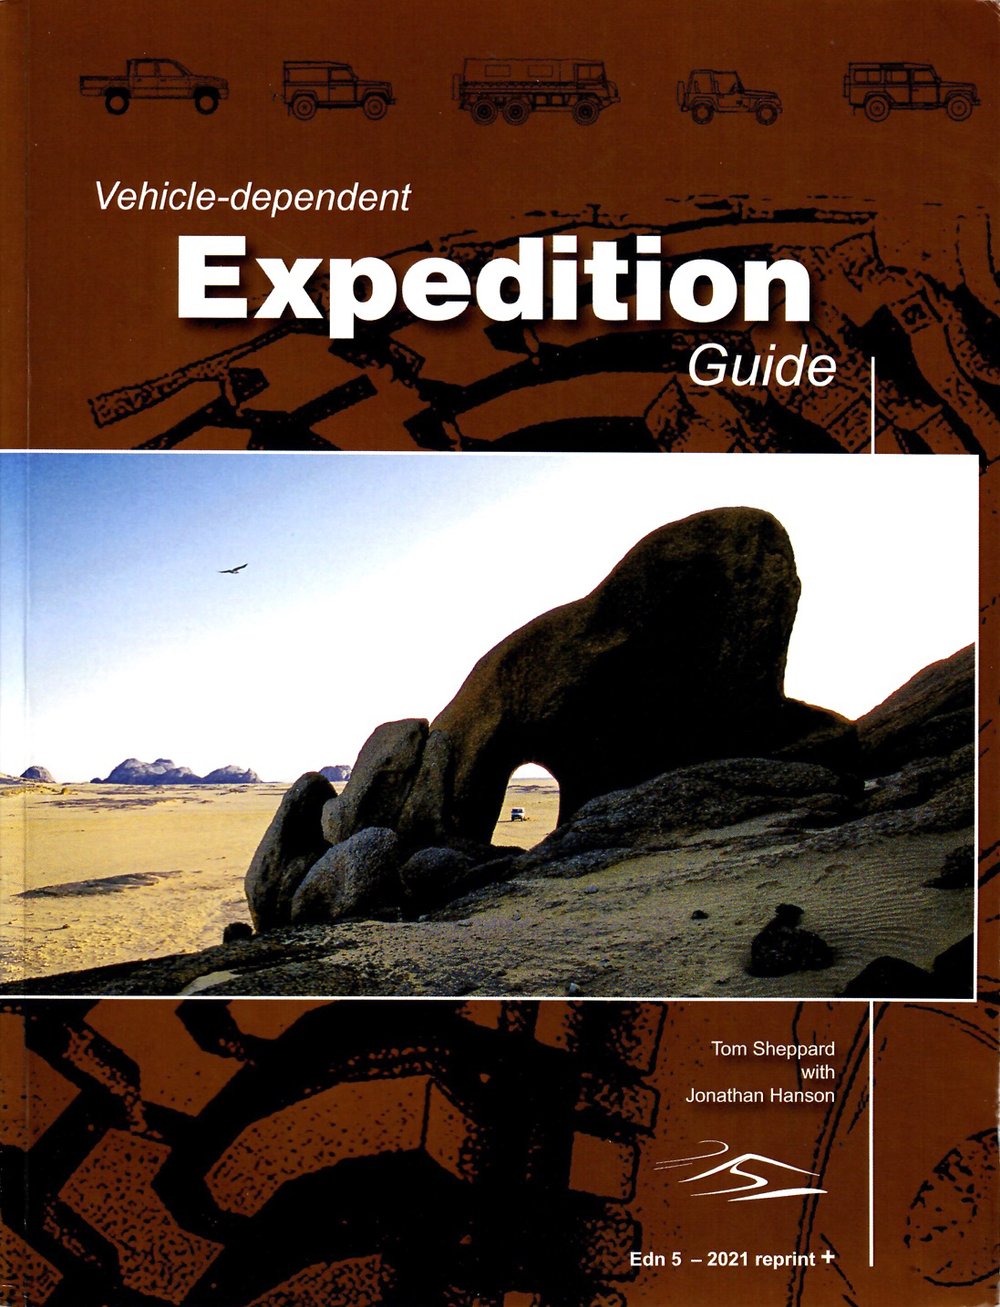 Vehicle-dependent Expedition Guide, 5th edition